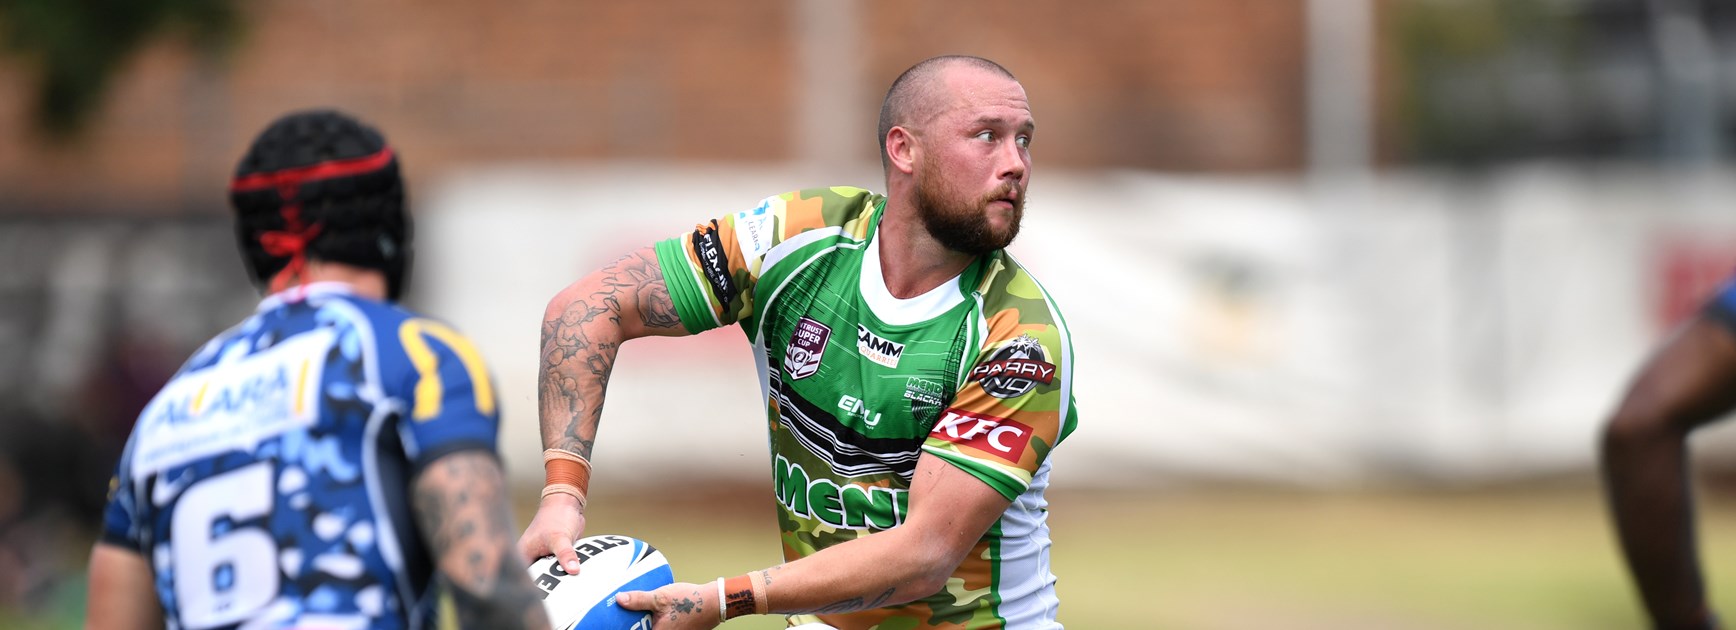 Townsville expose Jets defence in second half blitz